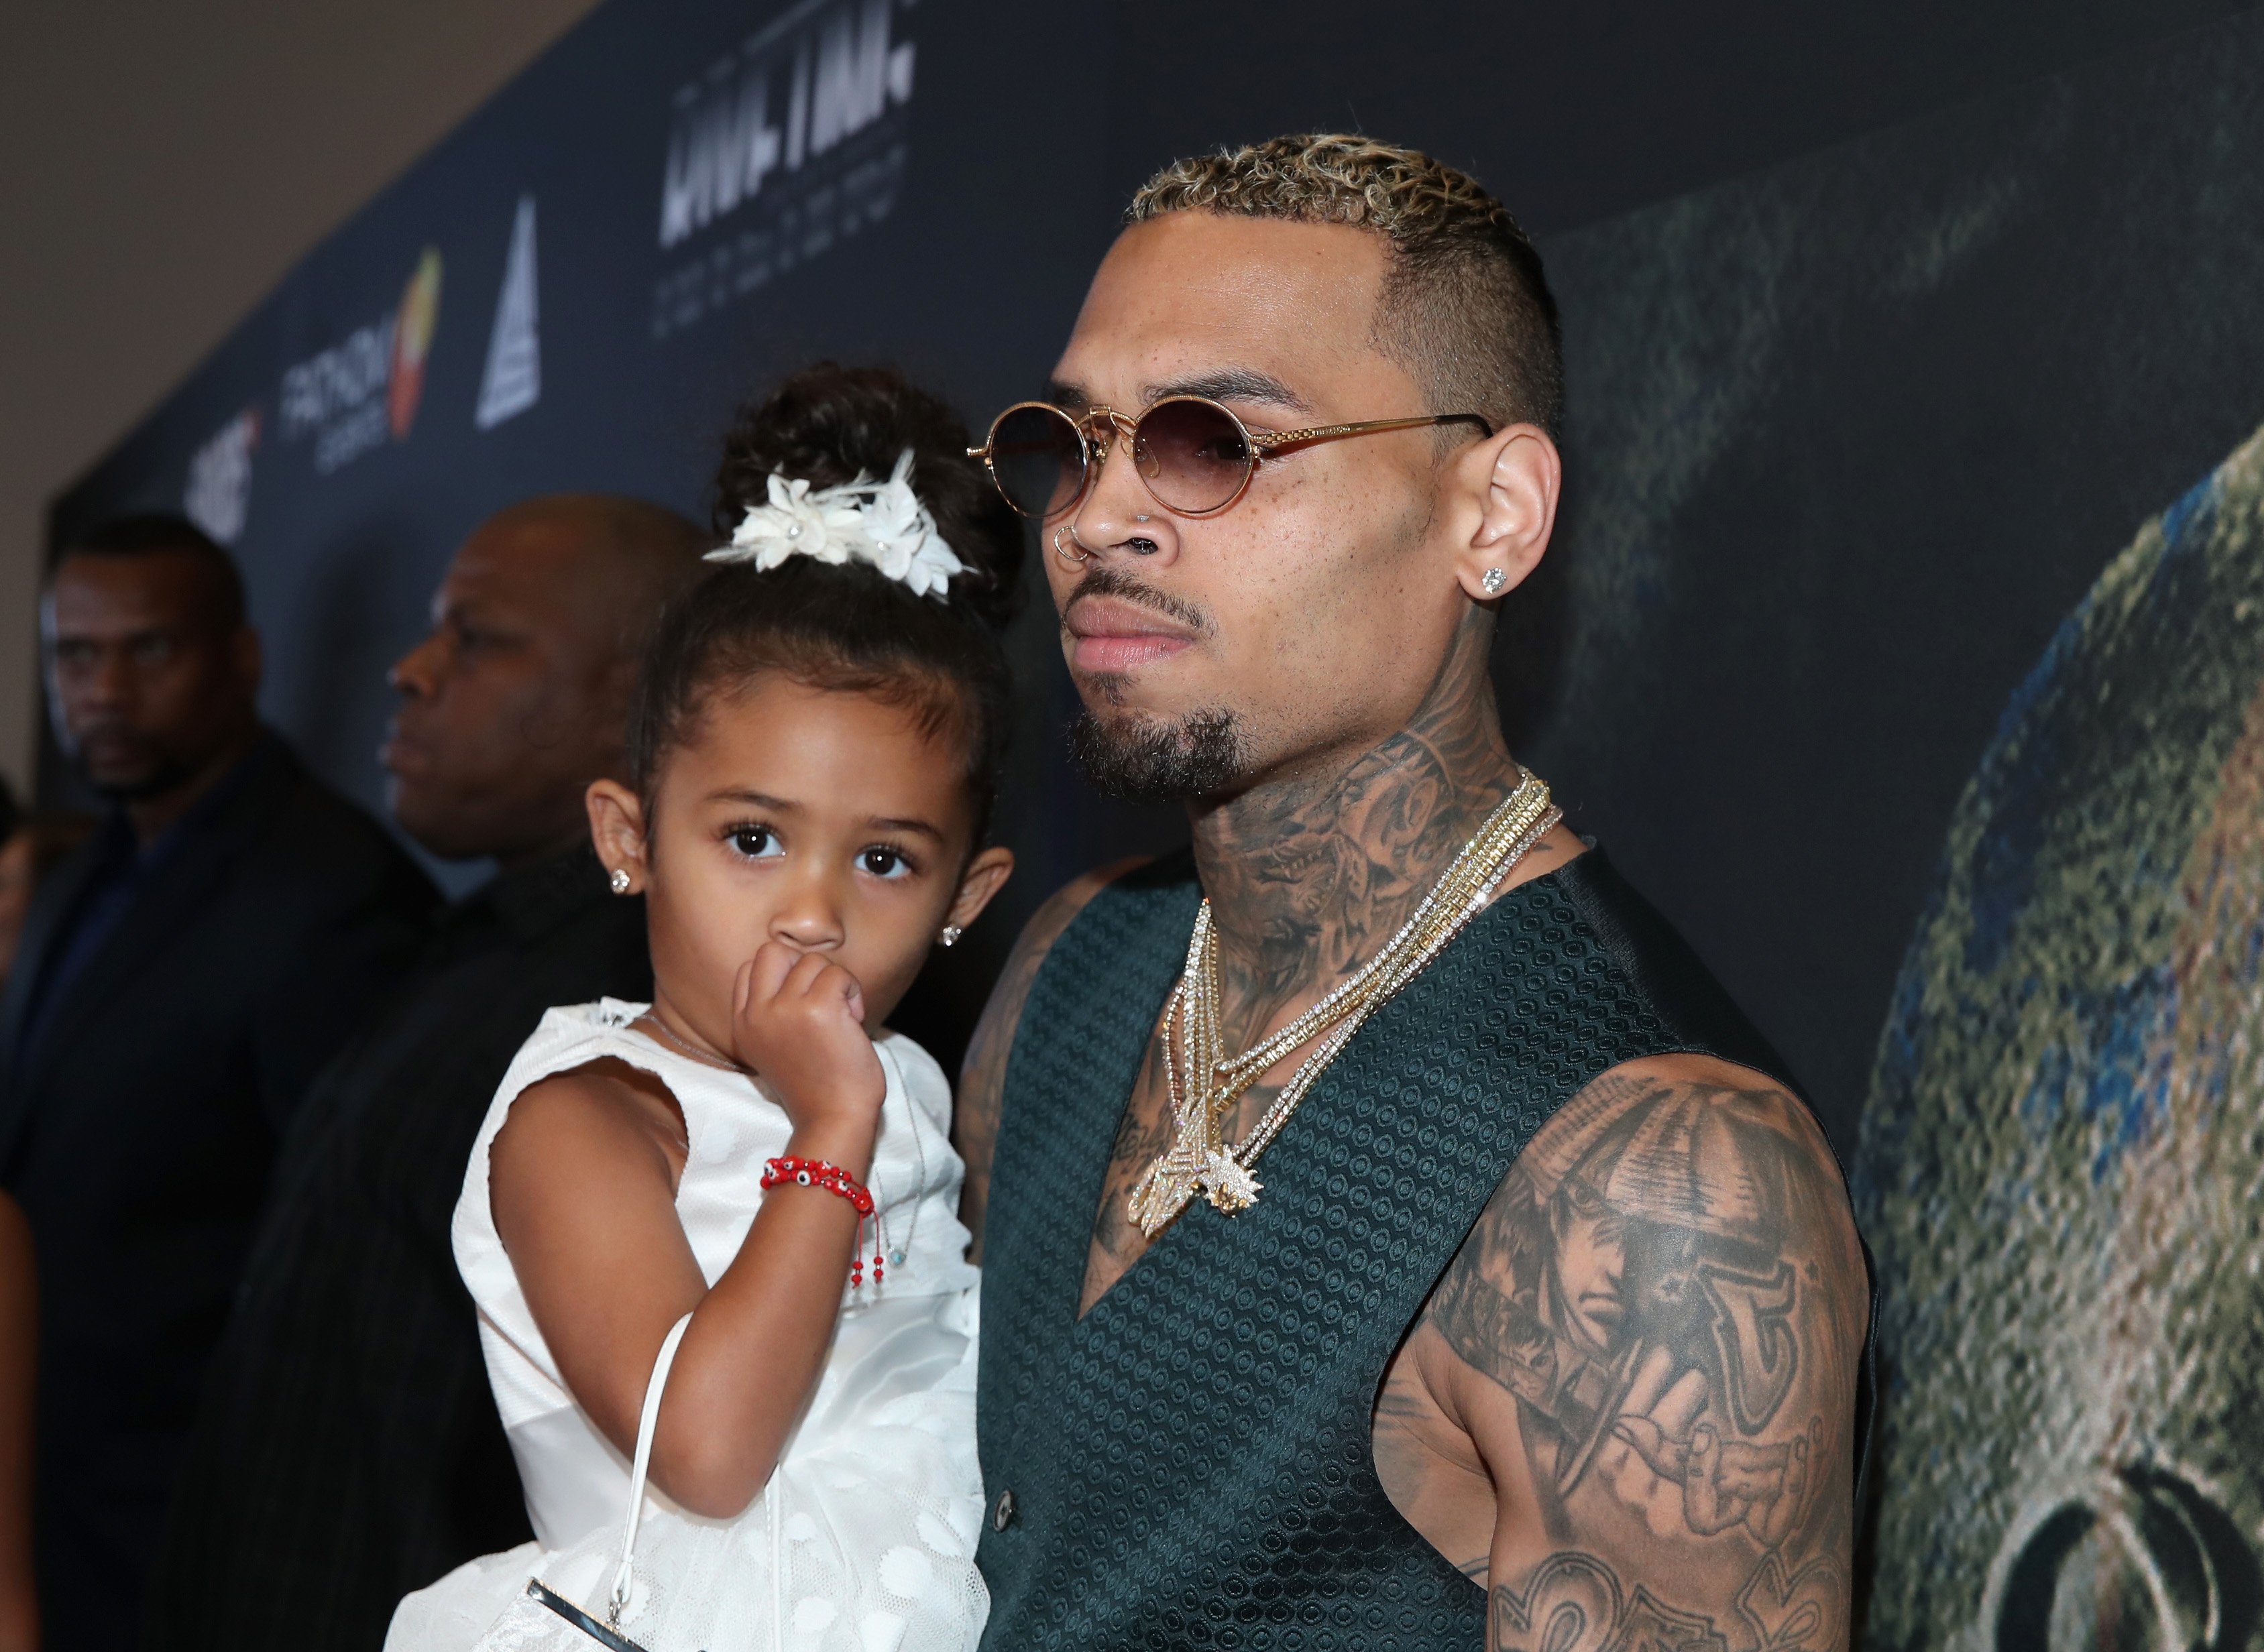 Chris Brown and his daughter Royalty at the Premiere Of "Chris Brown: Welcome To My Life" on June 6, 2017 | Photo: GettyImages